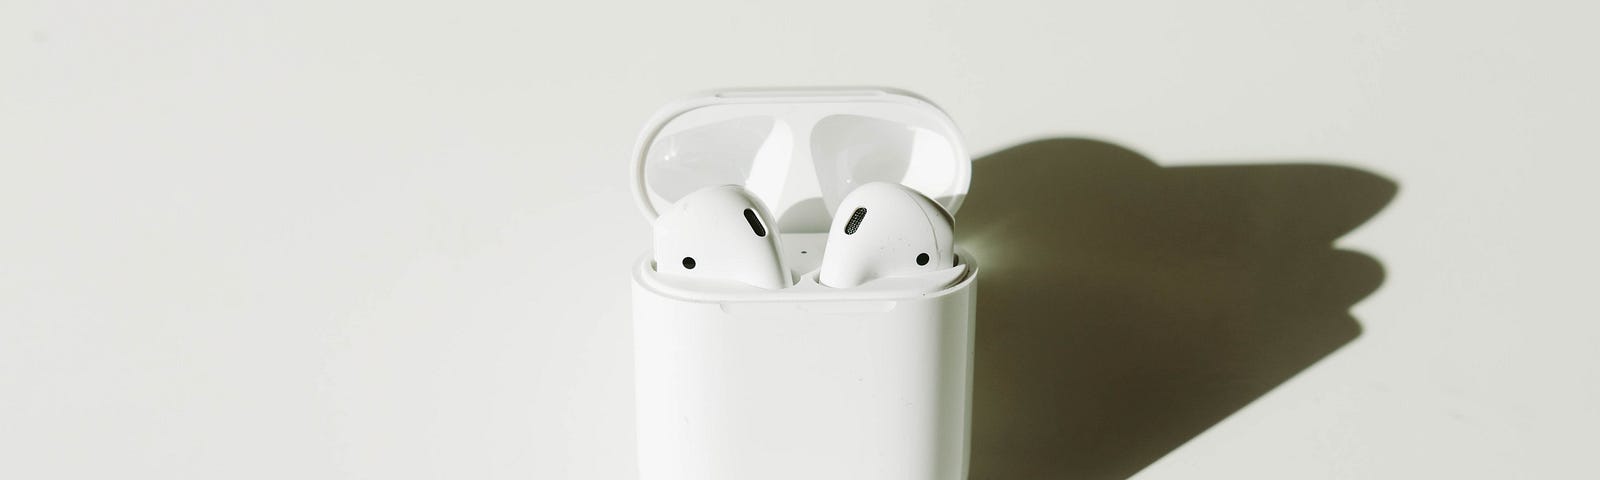 A pair of white headphone pods against a white background.